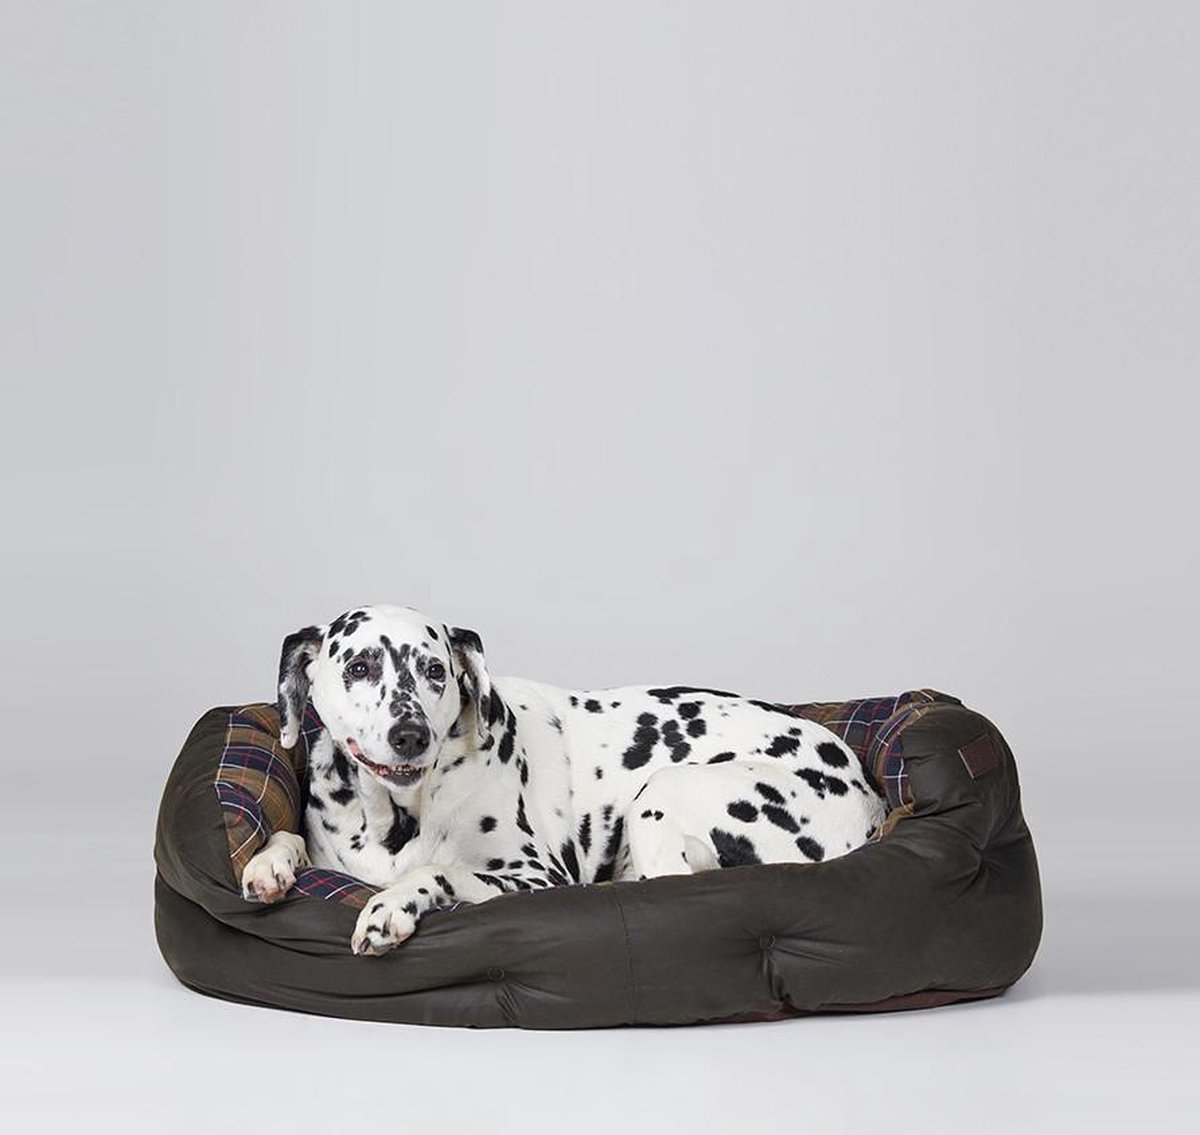 Barbour BARBOUR WAX/COTTON DOG BED 35IN DAC0020